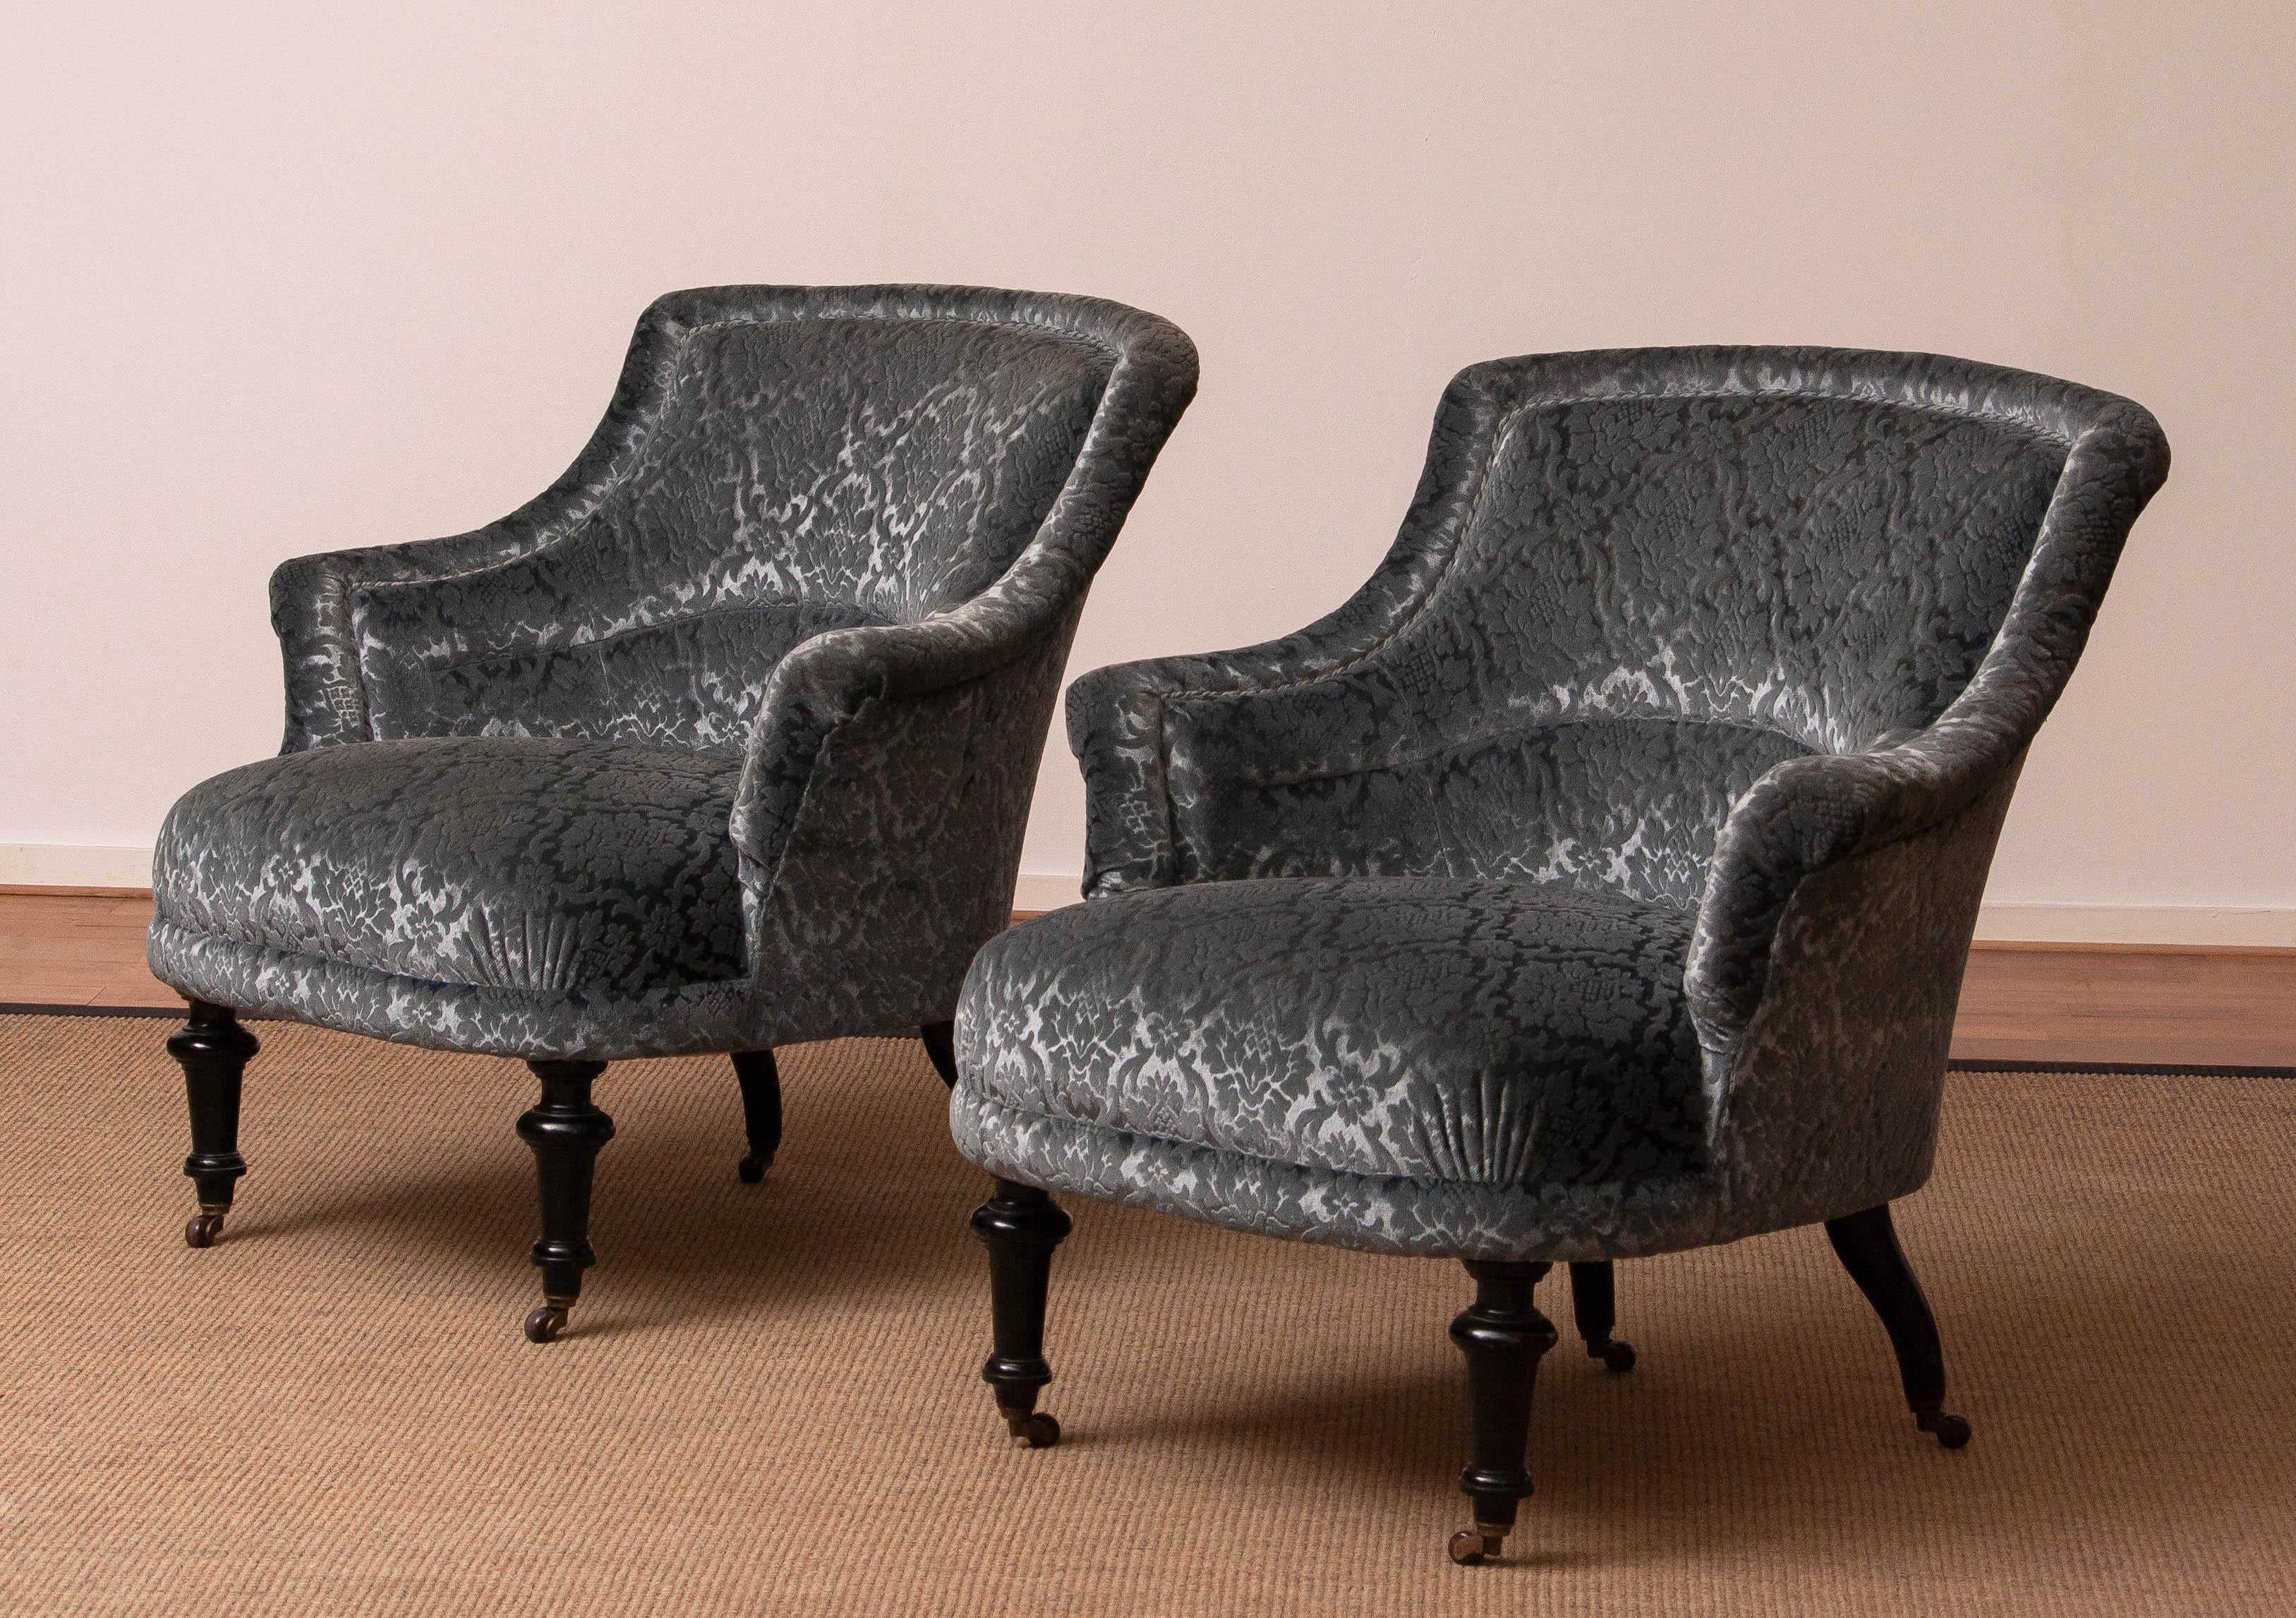 Beautiful pair of Napoleon lll chairs in grey velvet with black legs on wheels.
They are in a very nice condition.